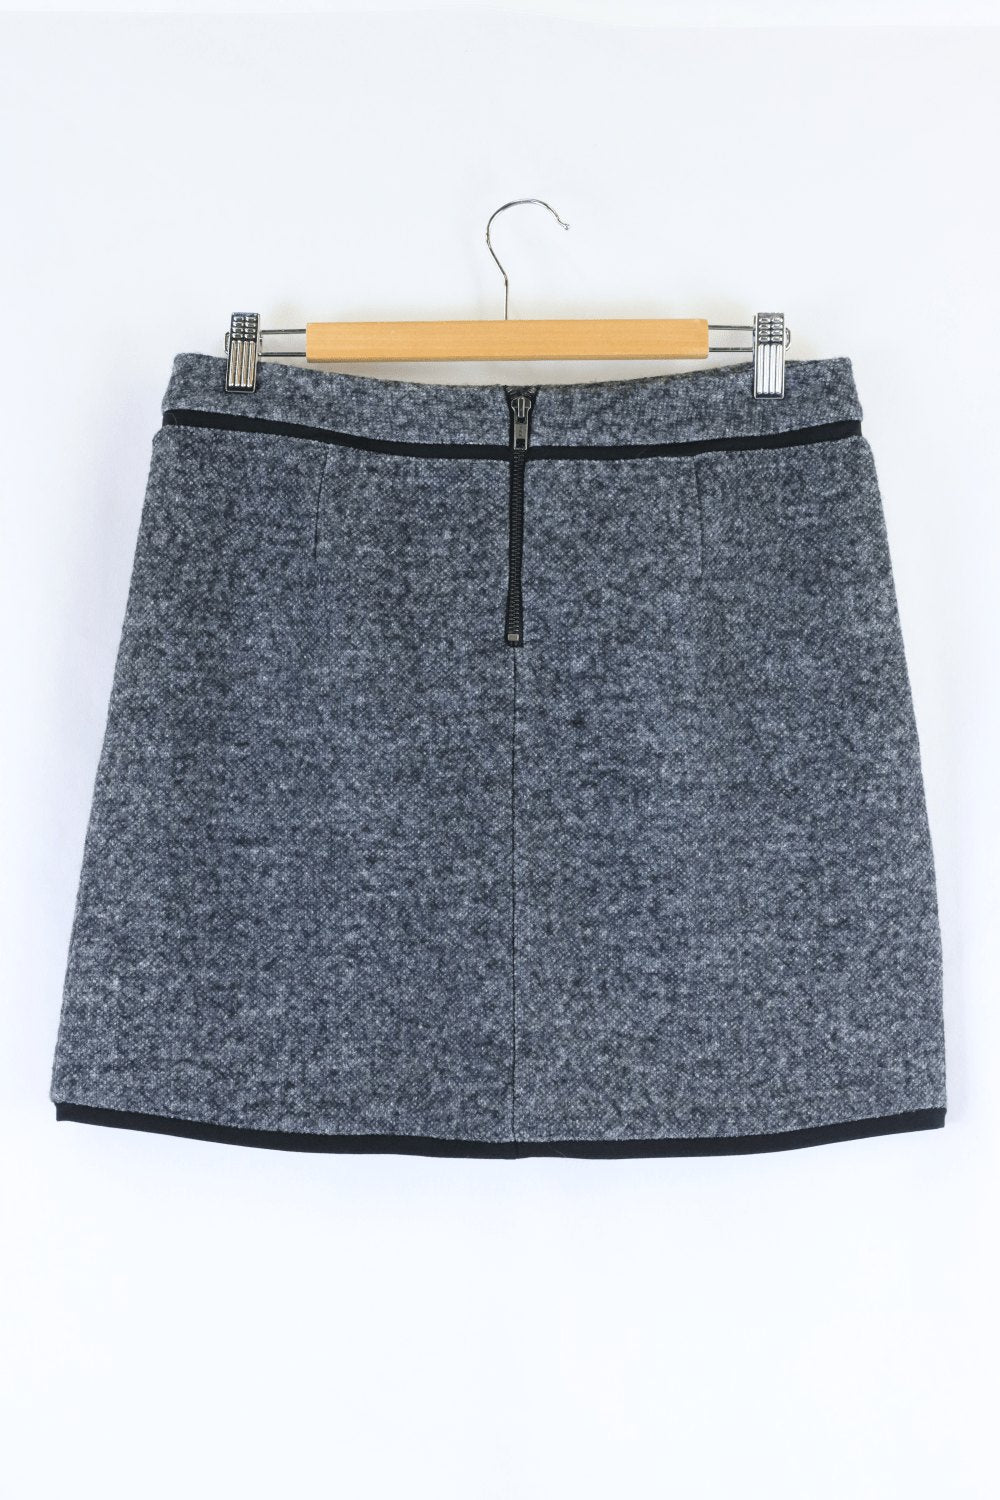 Country Road Grey Skirt S